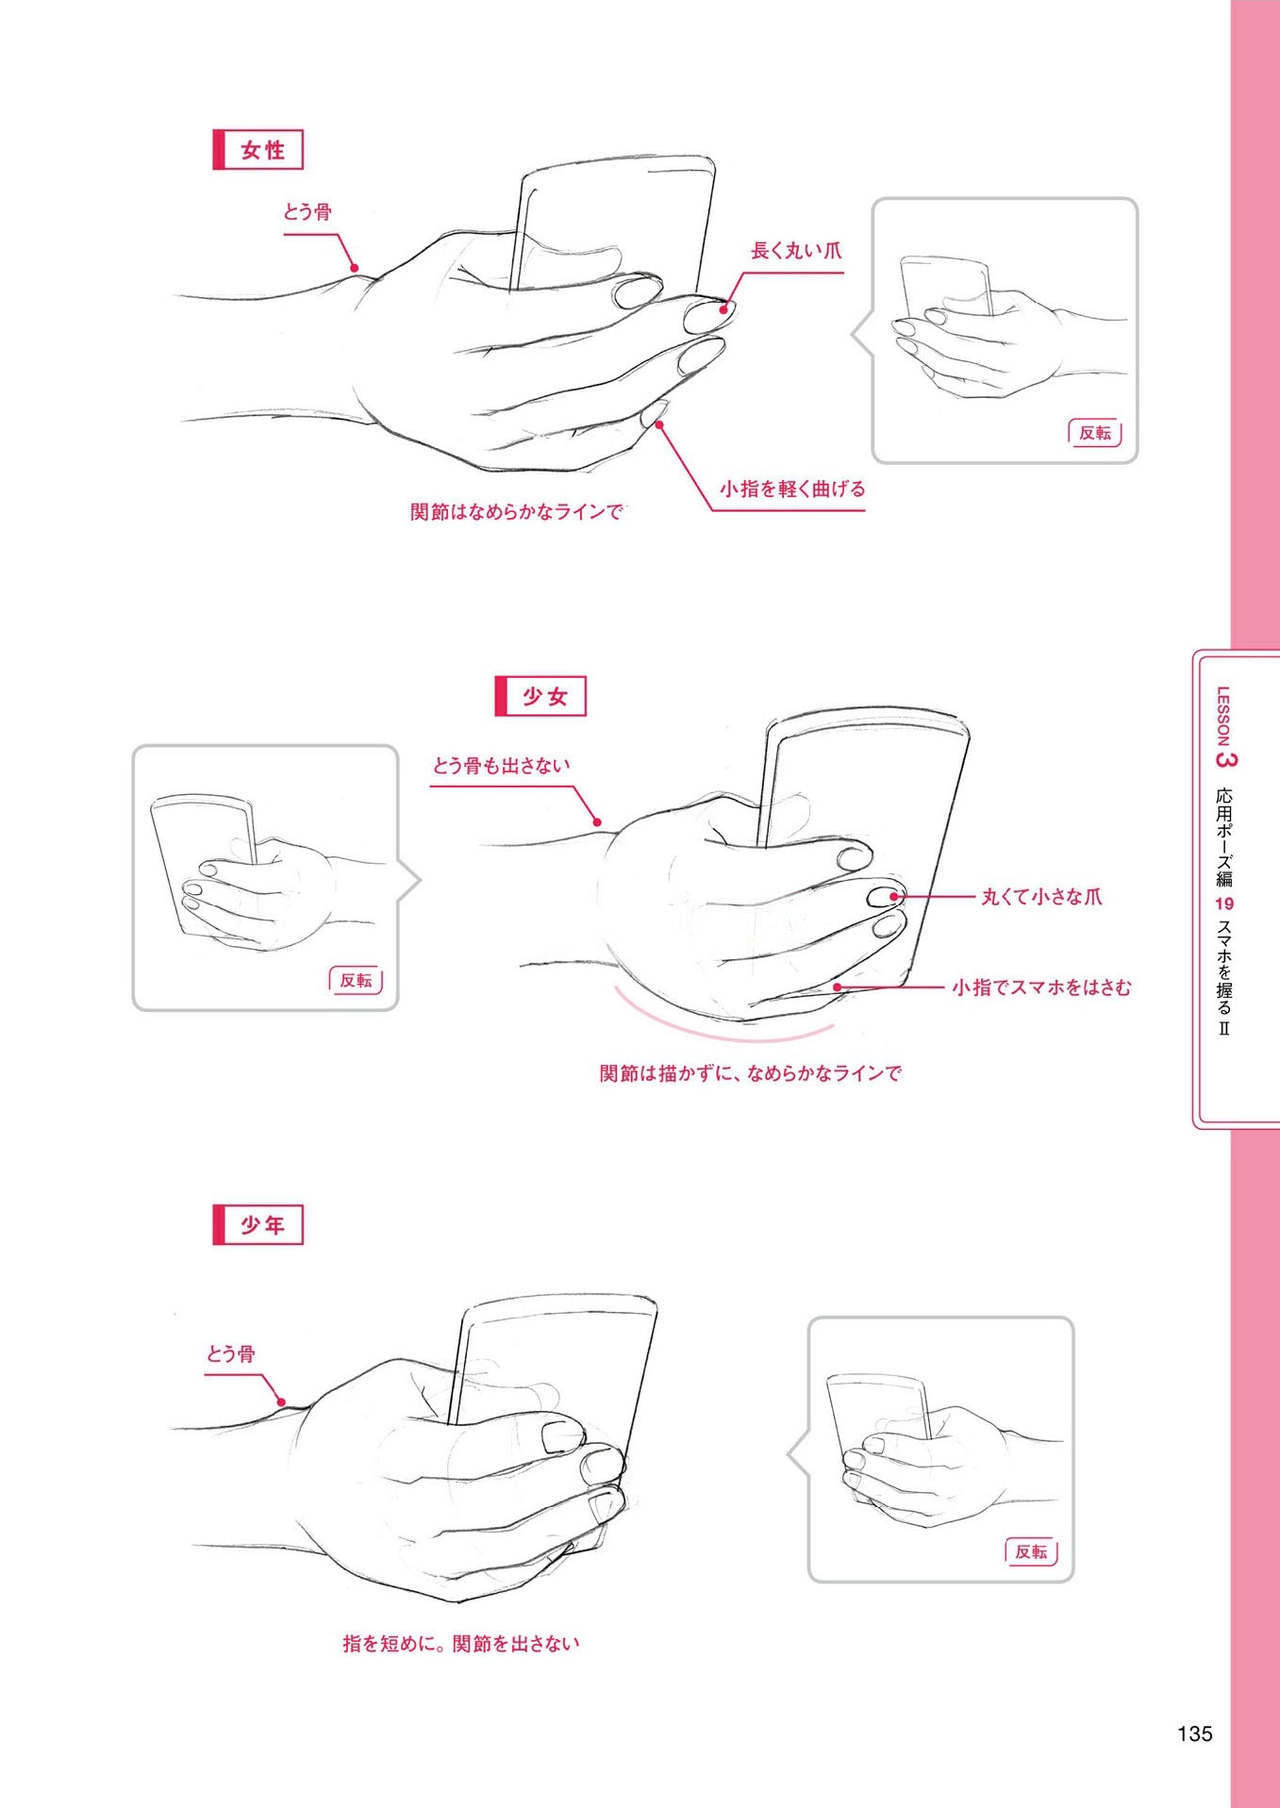 How to draw hands 135